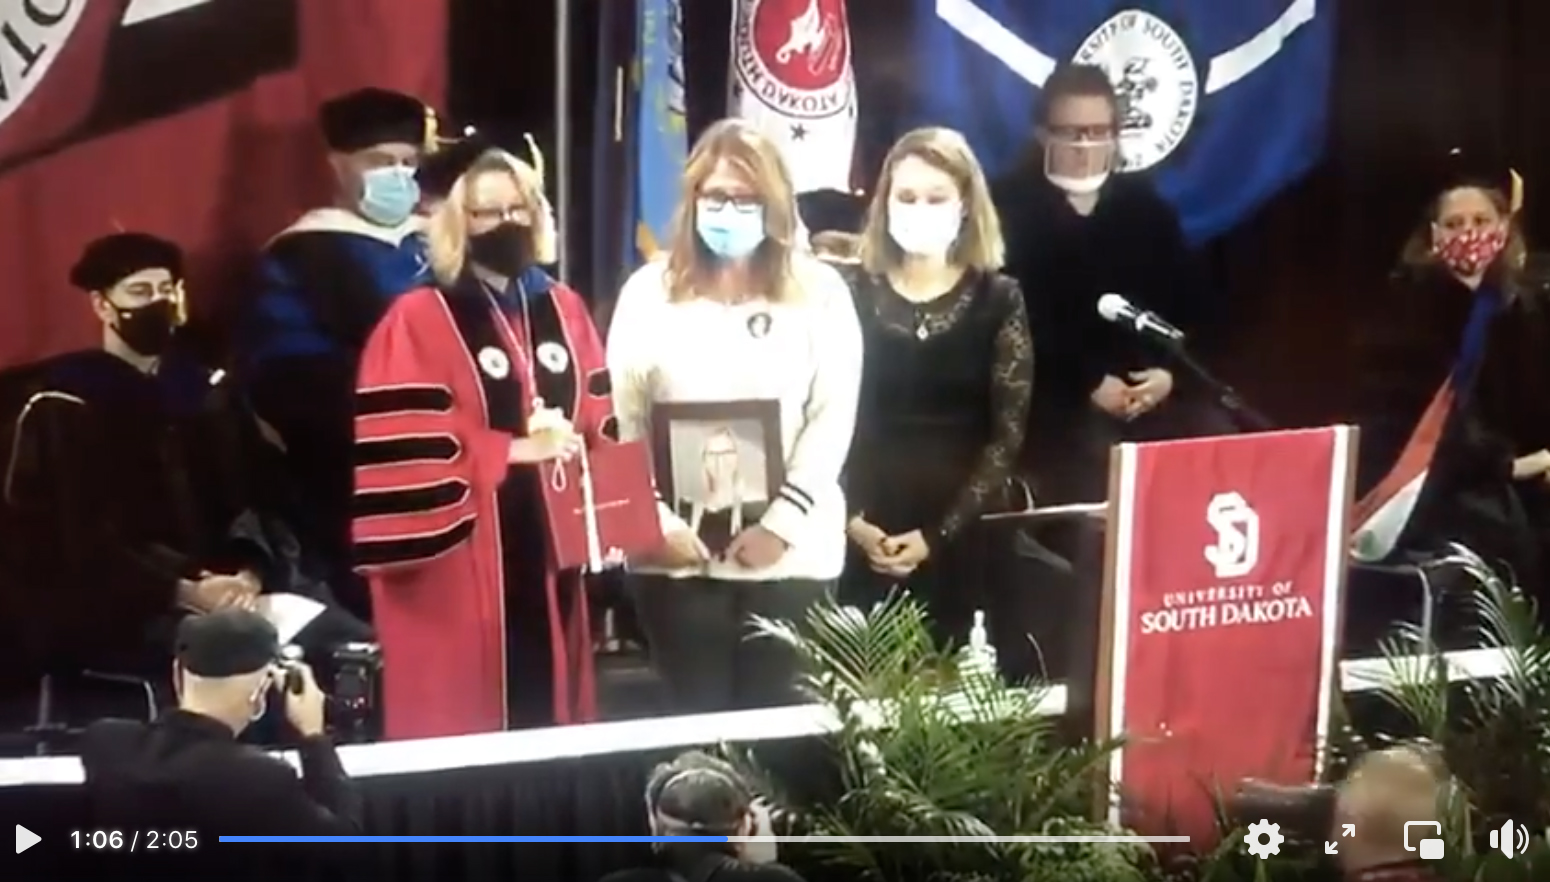 Barb and Alex accept Caitlyn's diploma at the 2020 University of South Dakota graduation